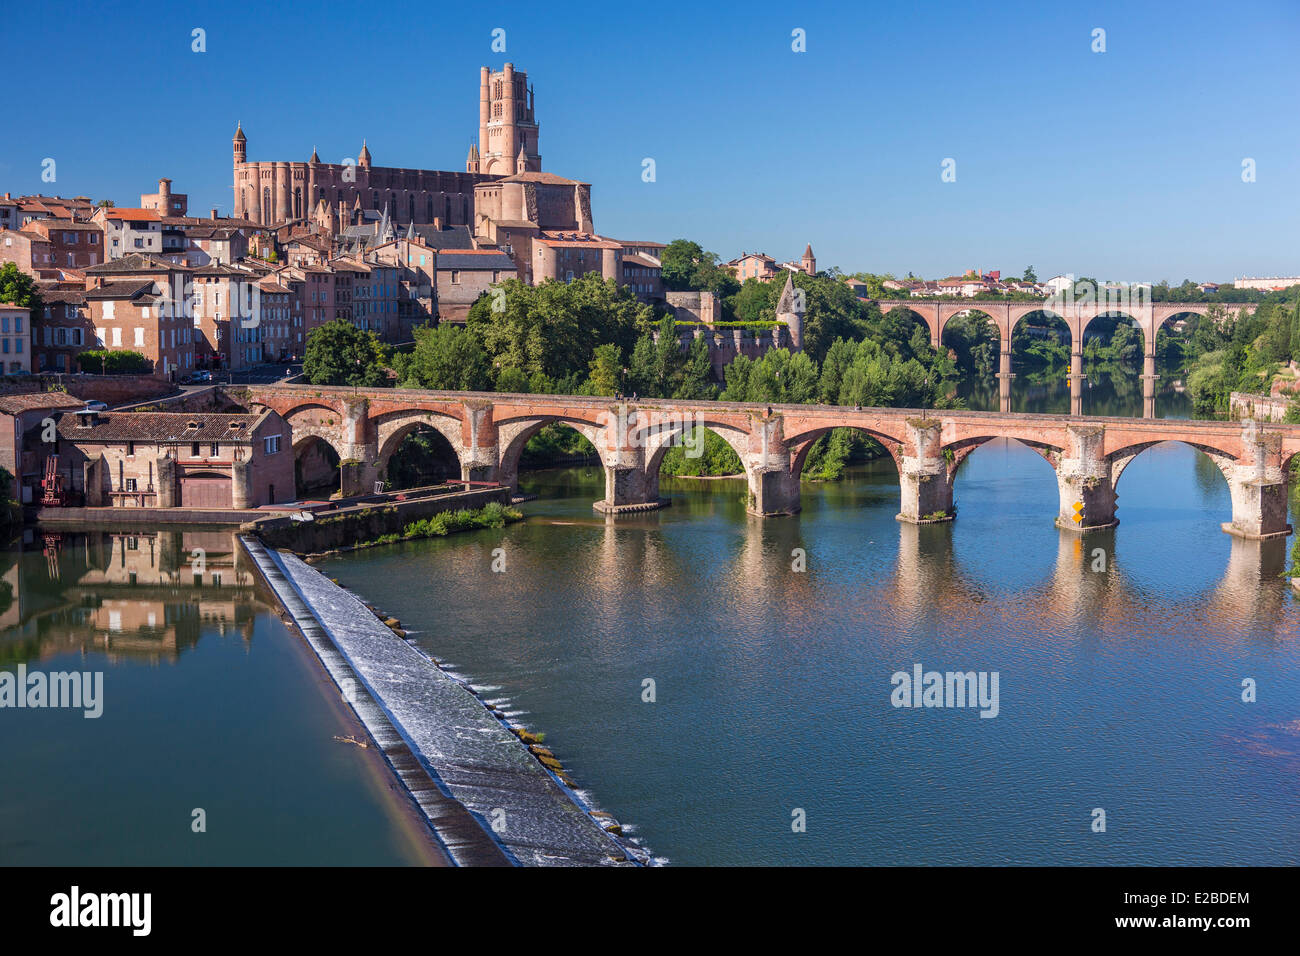 France, Tarn, Albi, episcopal city, listed as World Heritage by UNESCO, old bridge dated 11th century and Ste Cecile cathedral Stock Photo